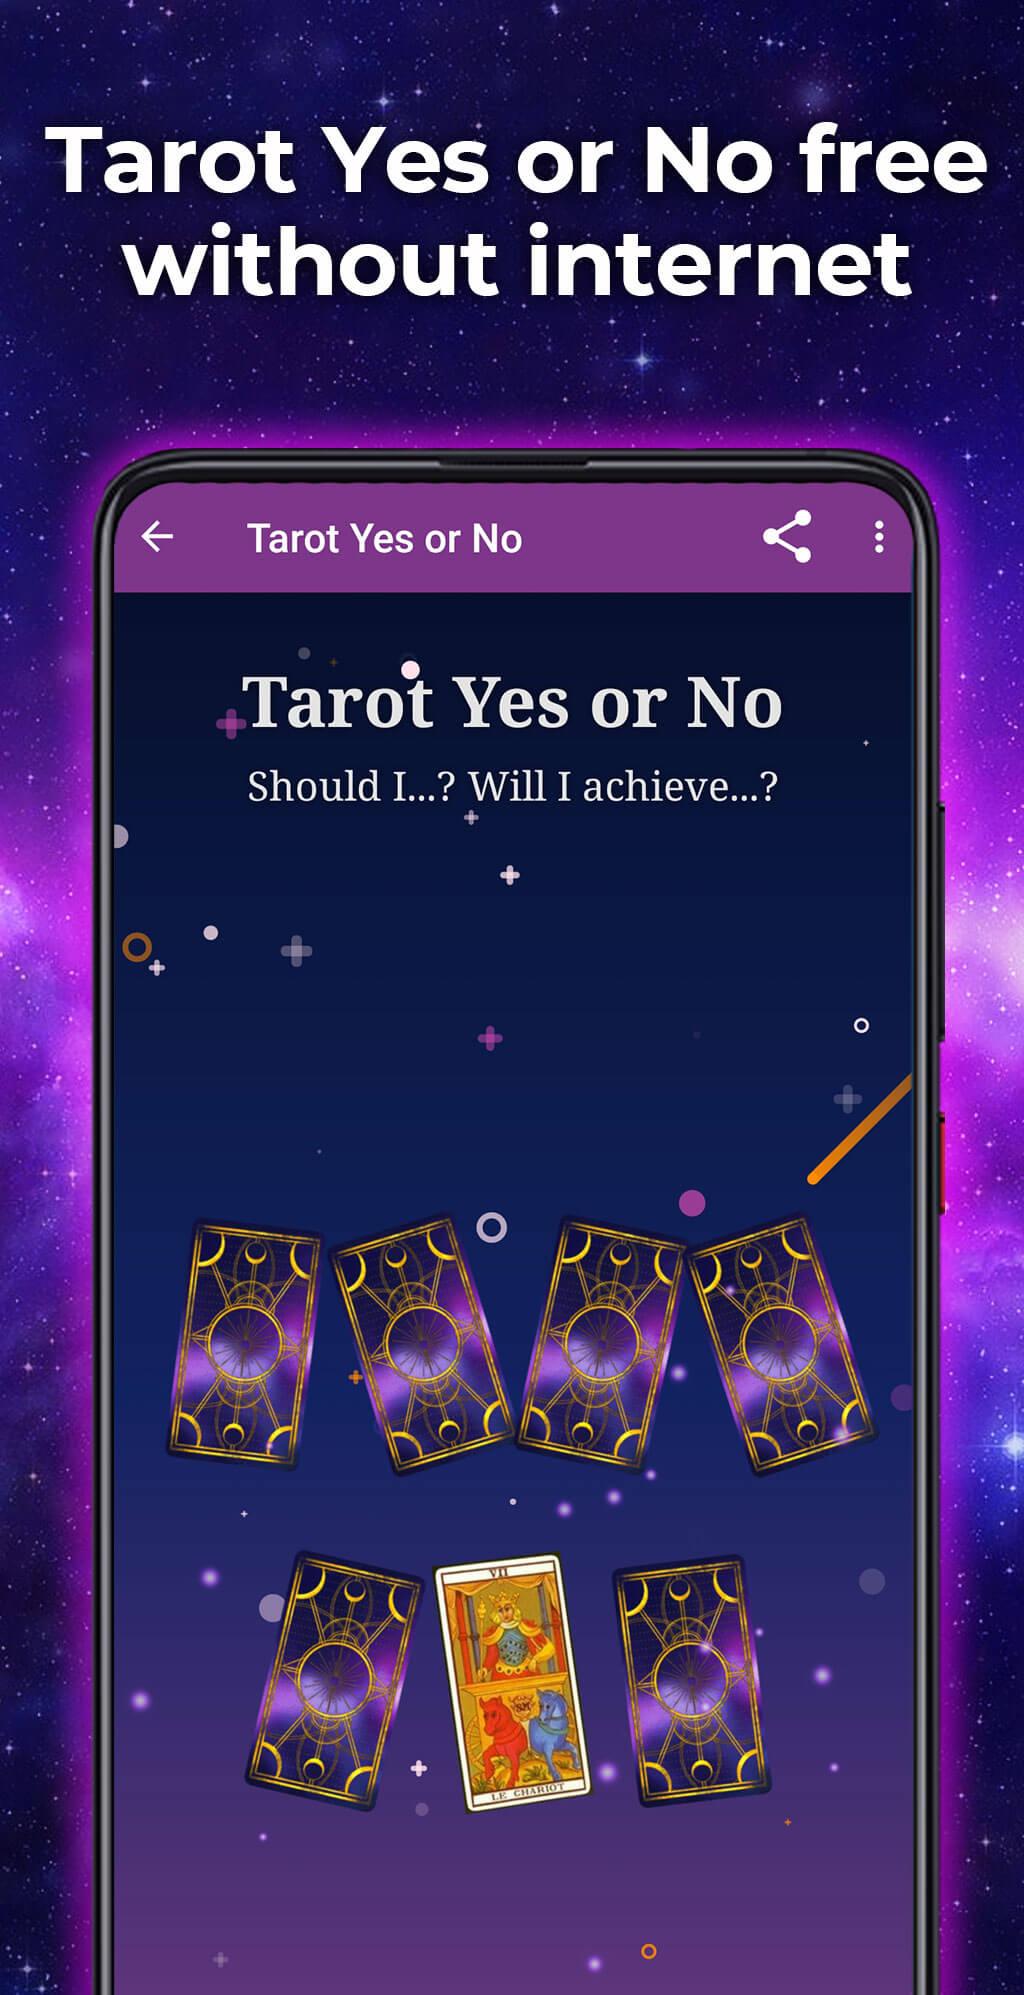 Tarot Card Reading in English for Android - APK Download